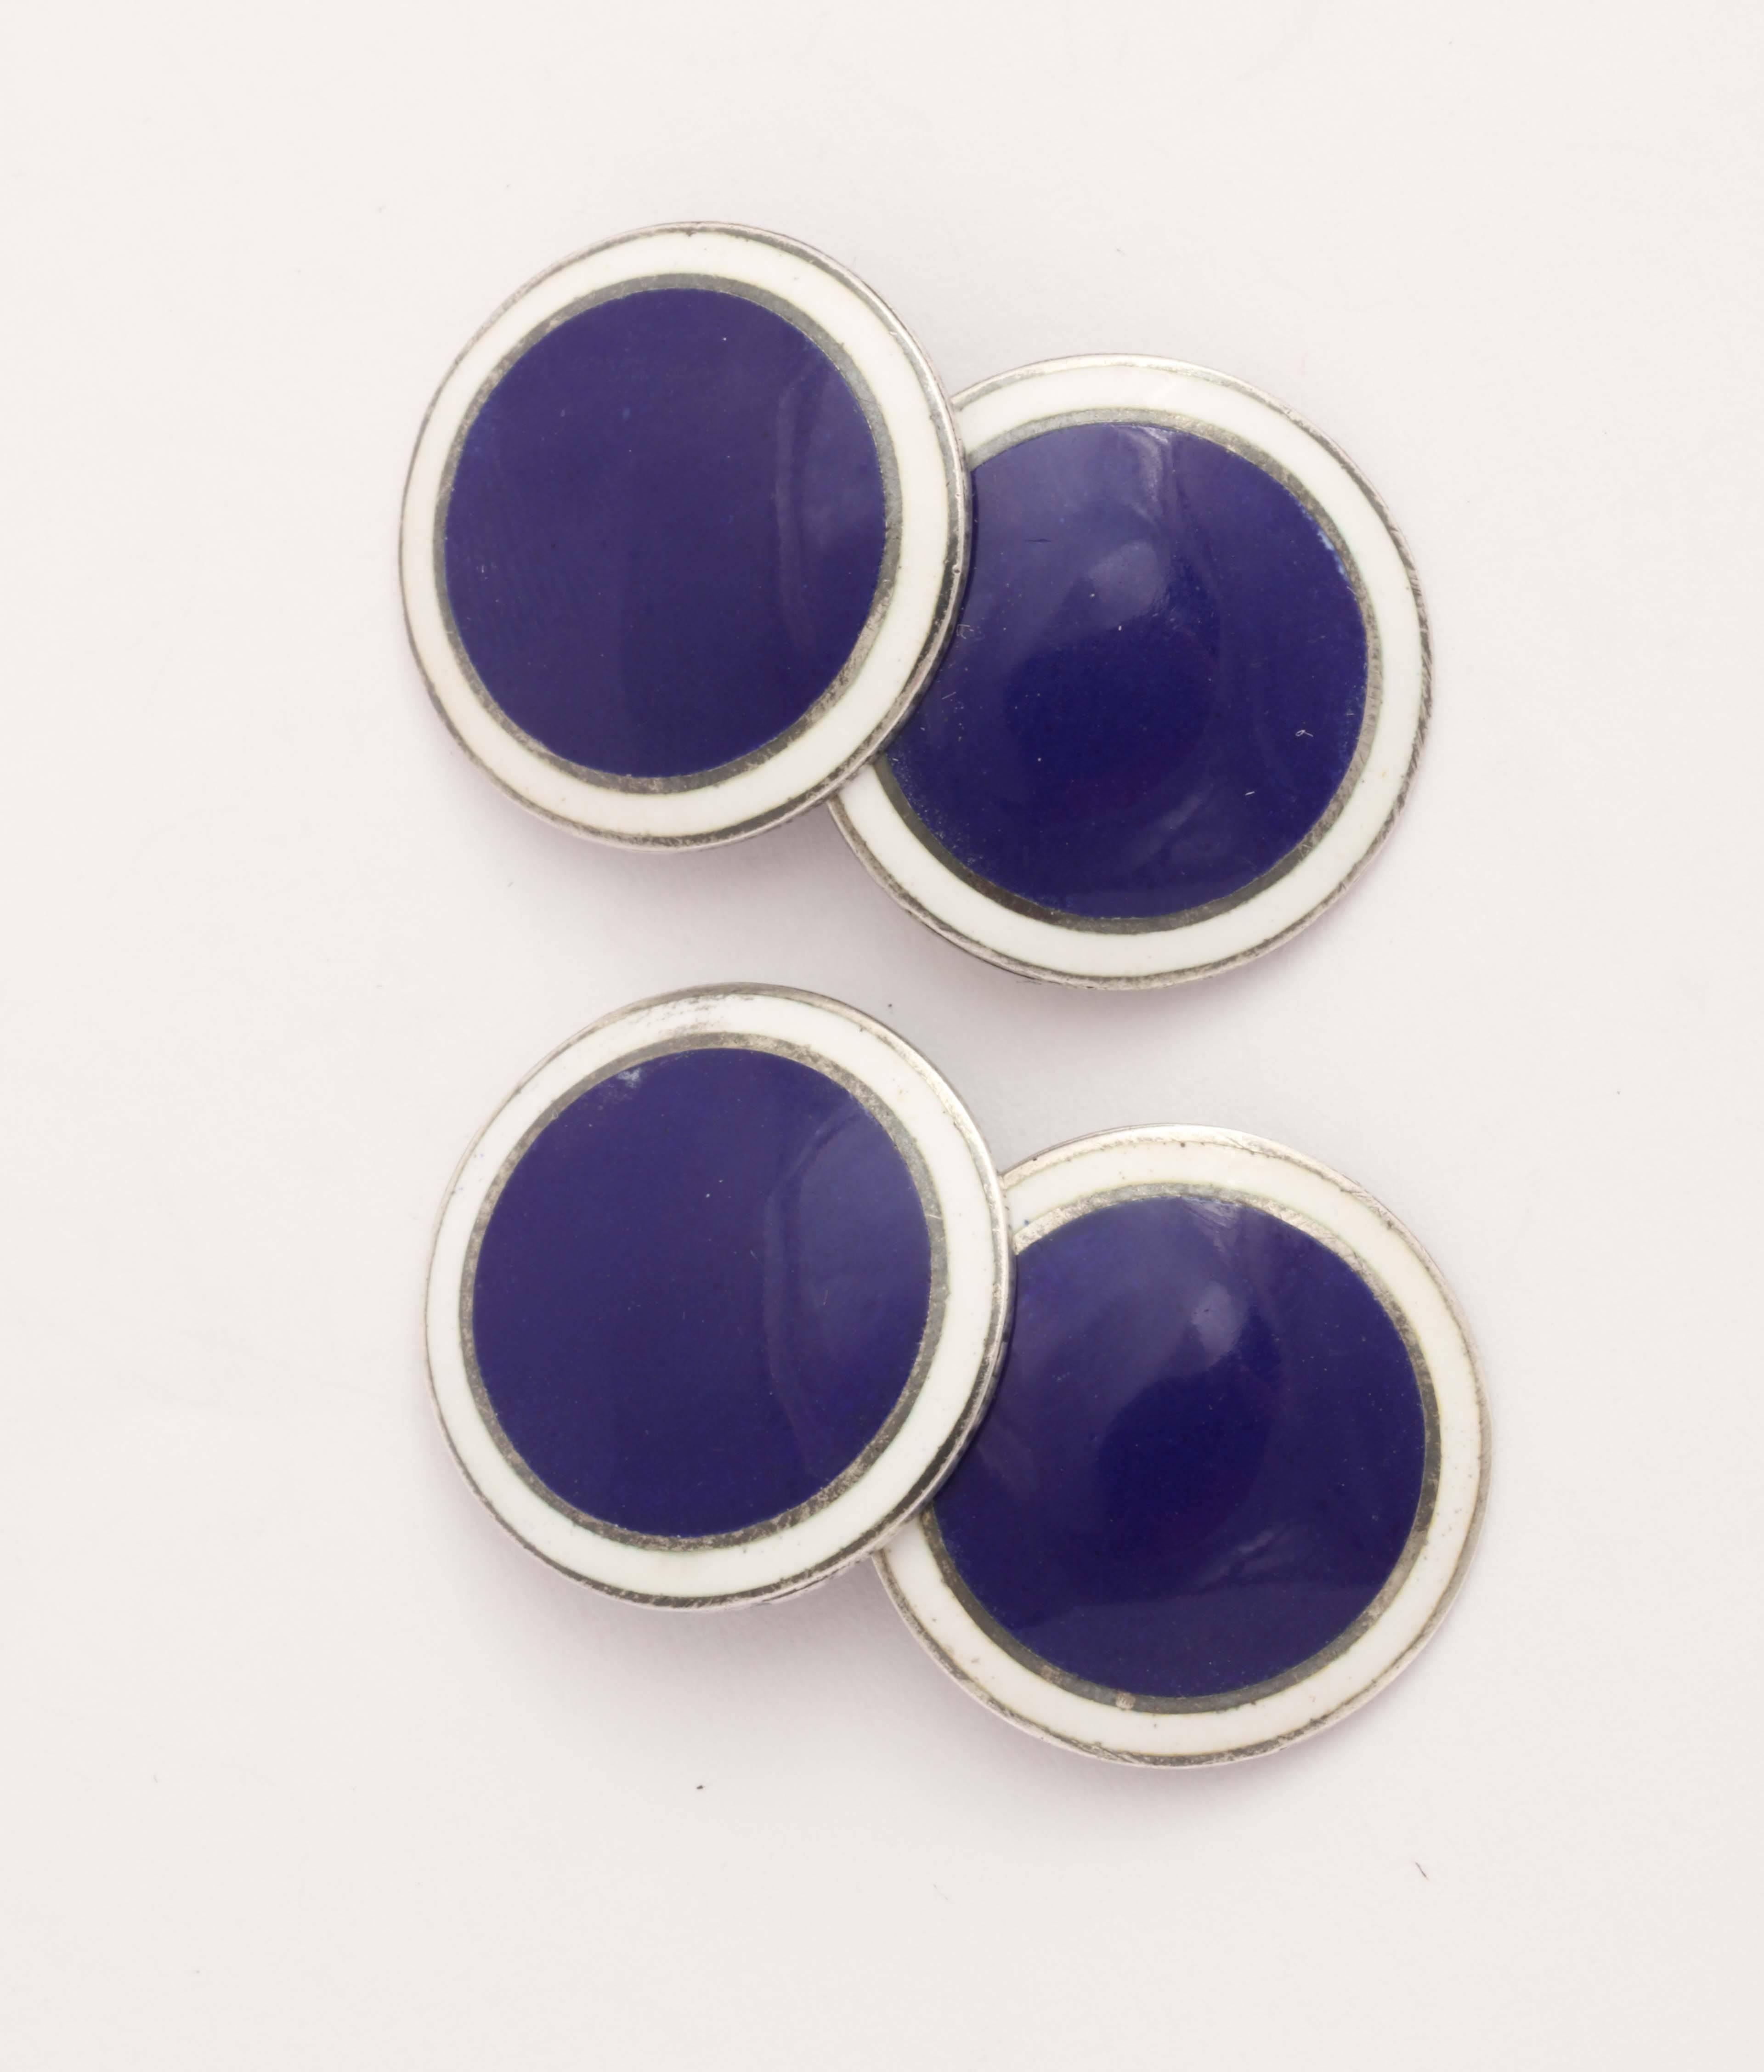 Foster & Bailey American Art Deco Sterling Silver and Guilloche Enamel Cufflinks im Zustand „Neu“ im Angebot in New York, NY